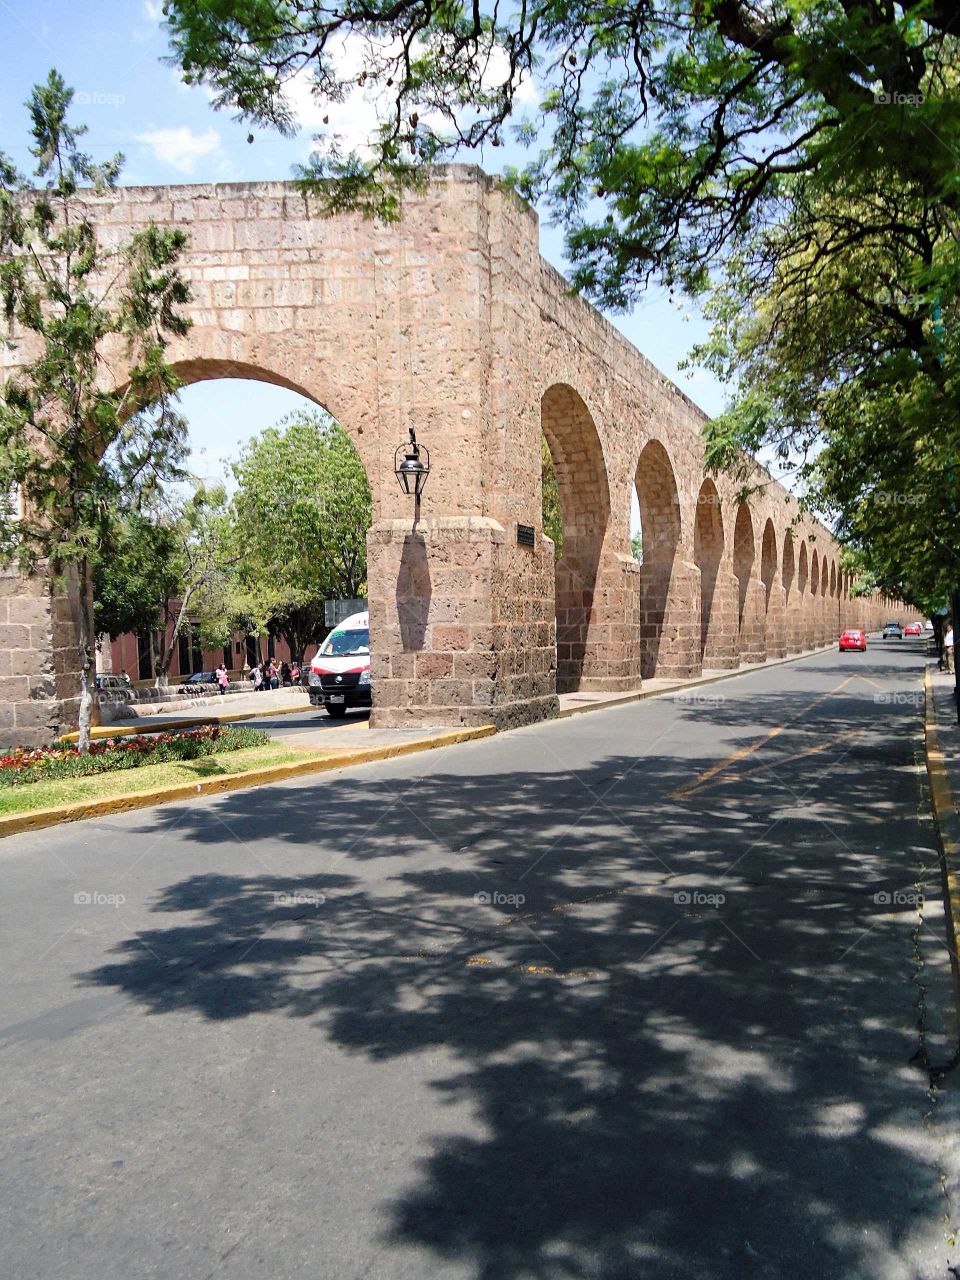 old meets new: an ancient aqueduct and city streets